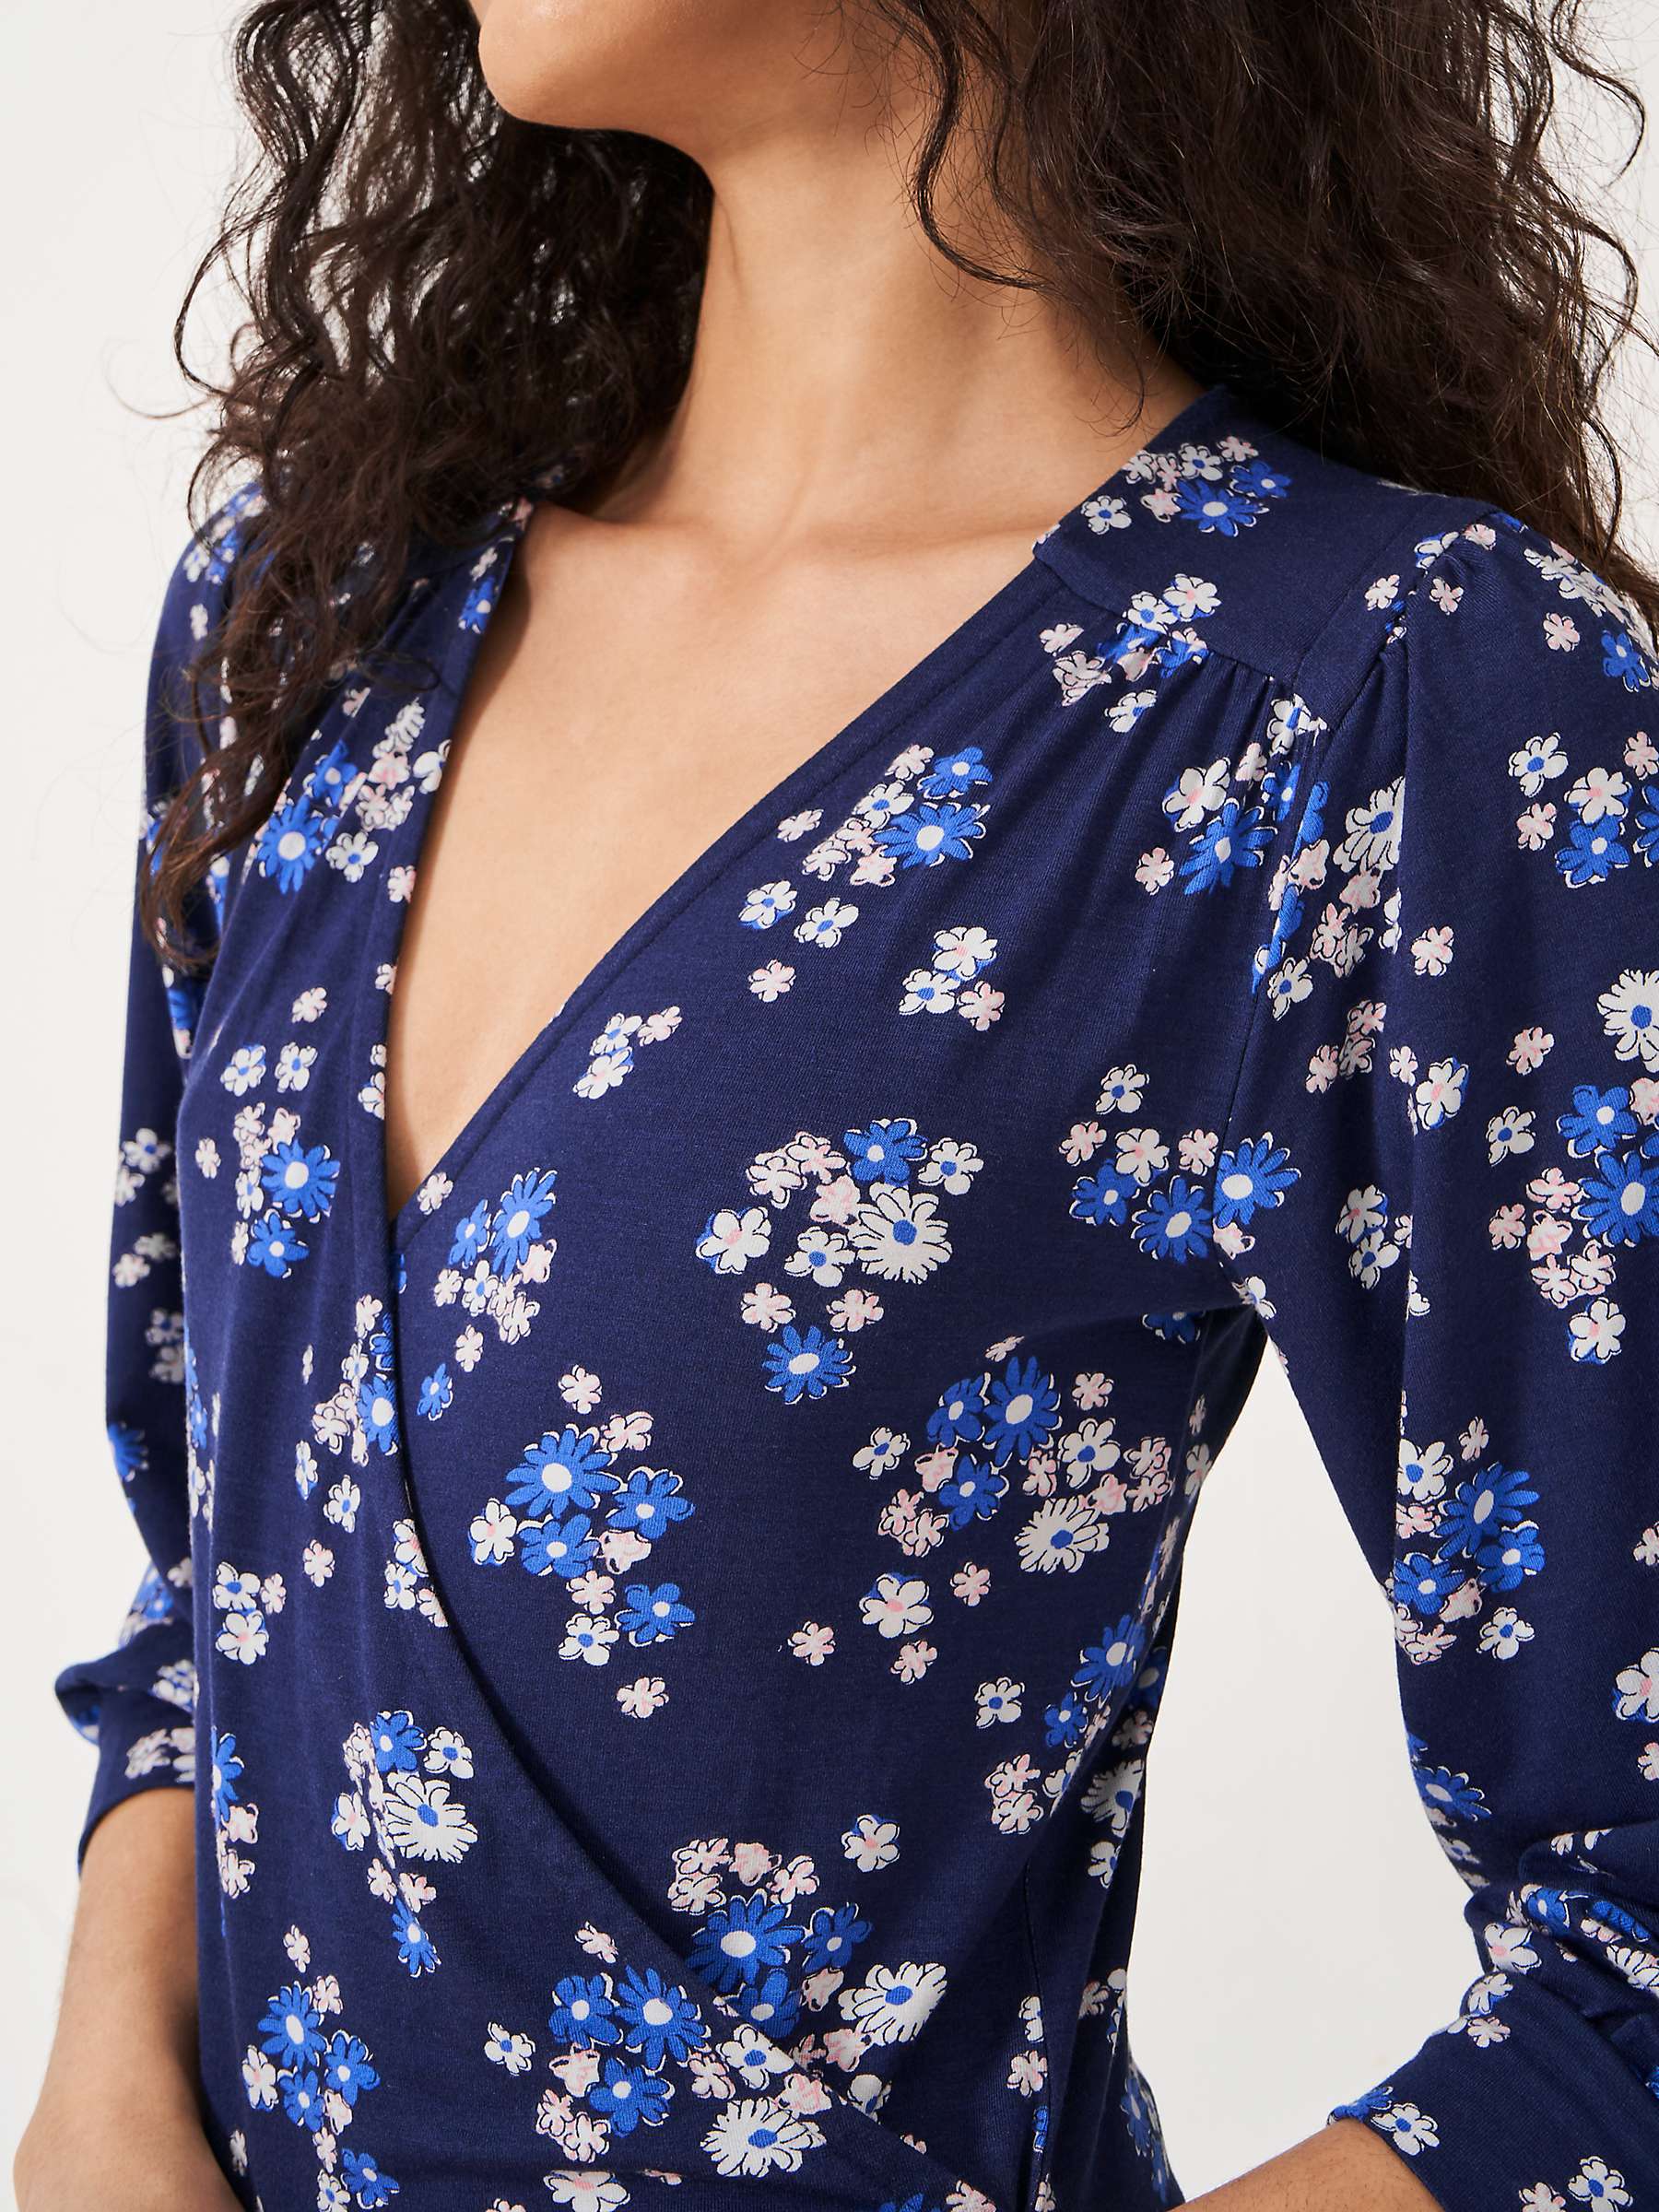 Buy Crew Clothing Wrap Top Online at johnlewis.com